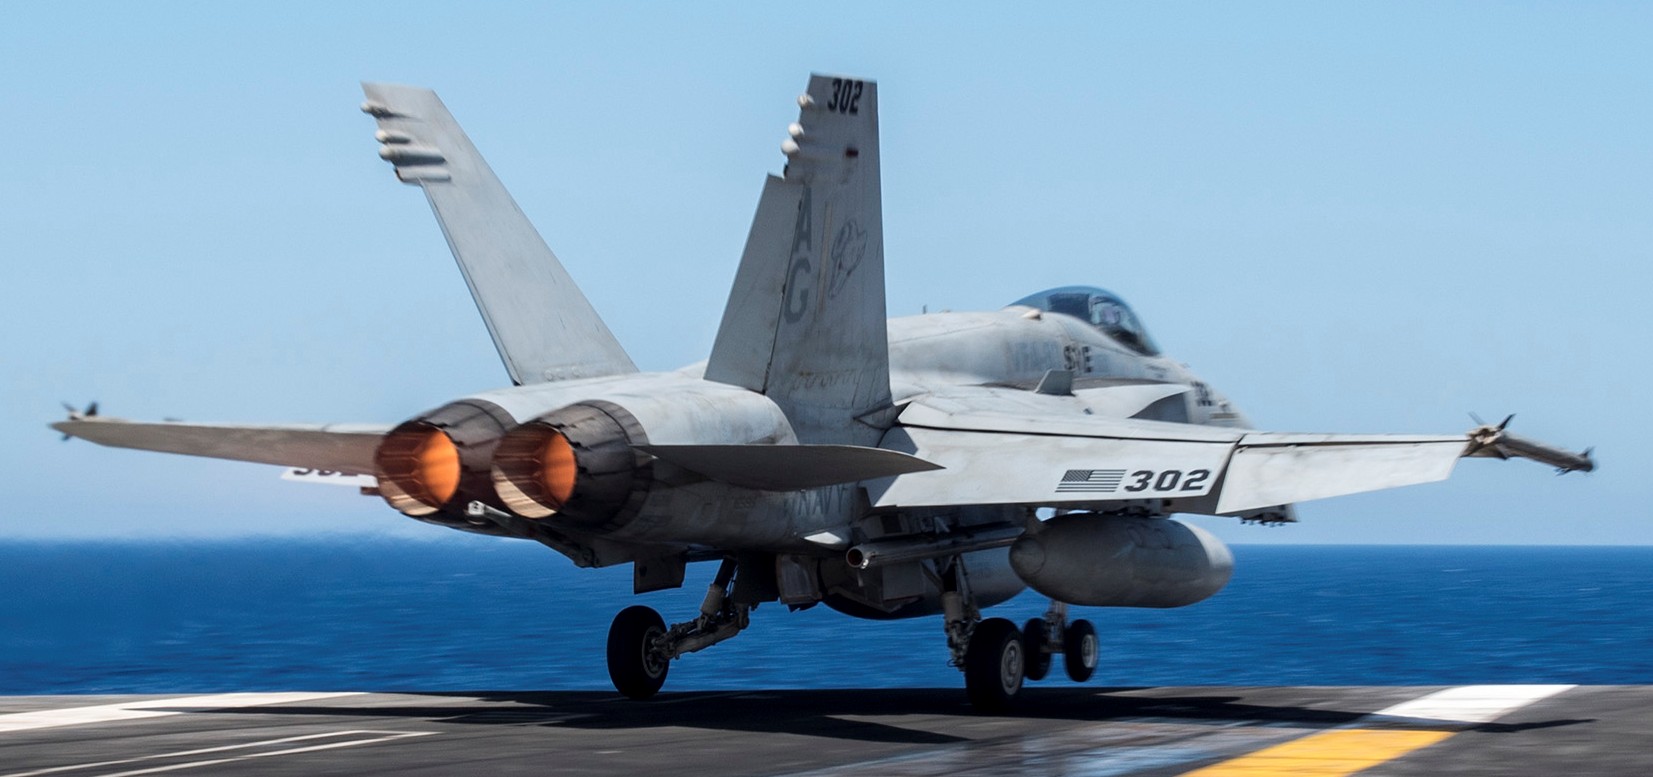 vfa-83 rampagers strike fighter squadron f/a-18c hornet cvw-7 uss harry s. truman cvn-75 52p